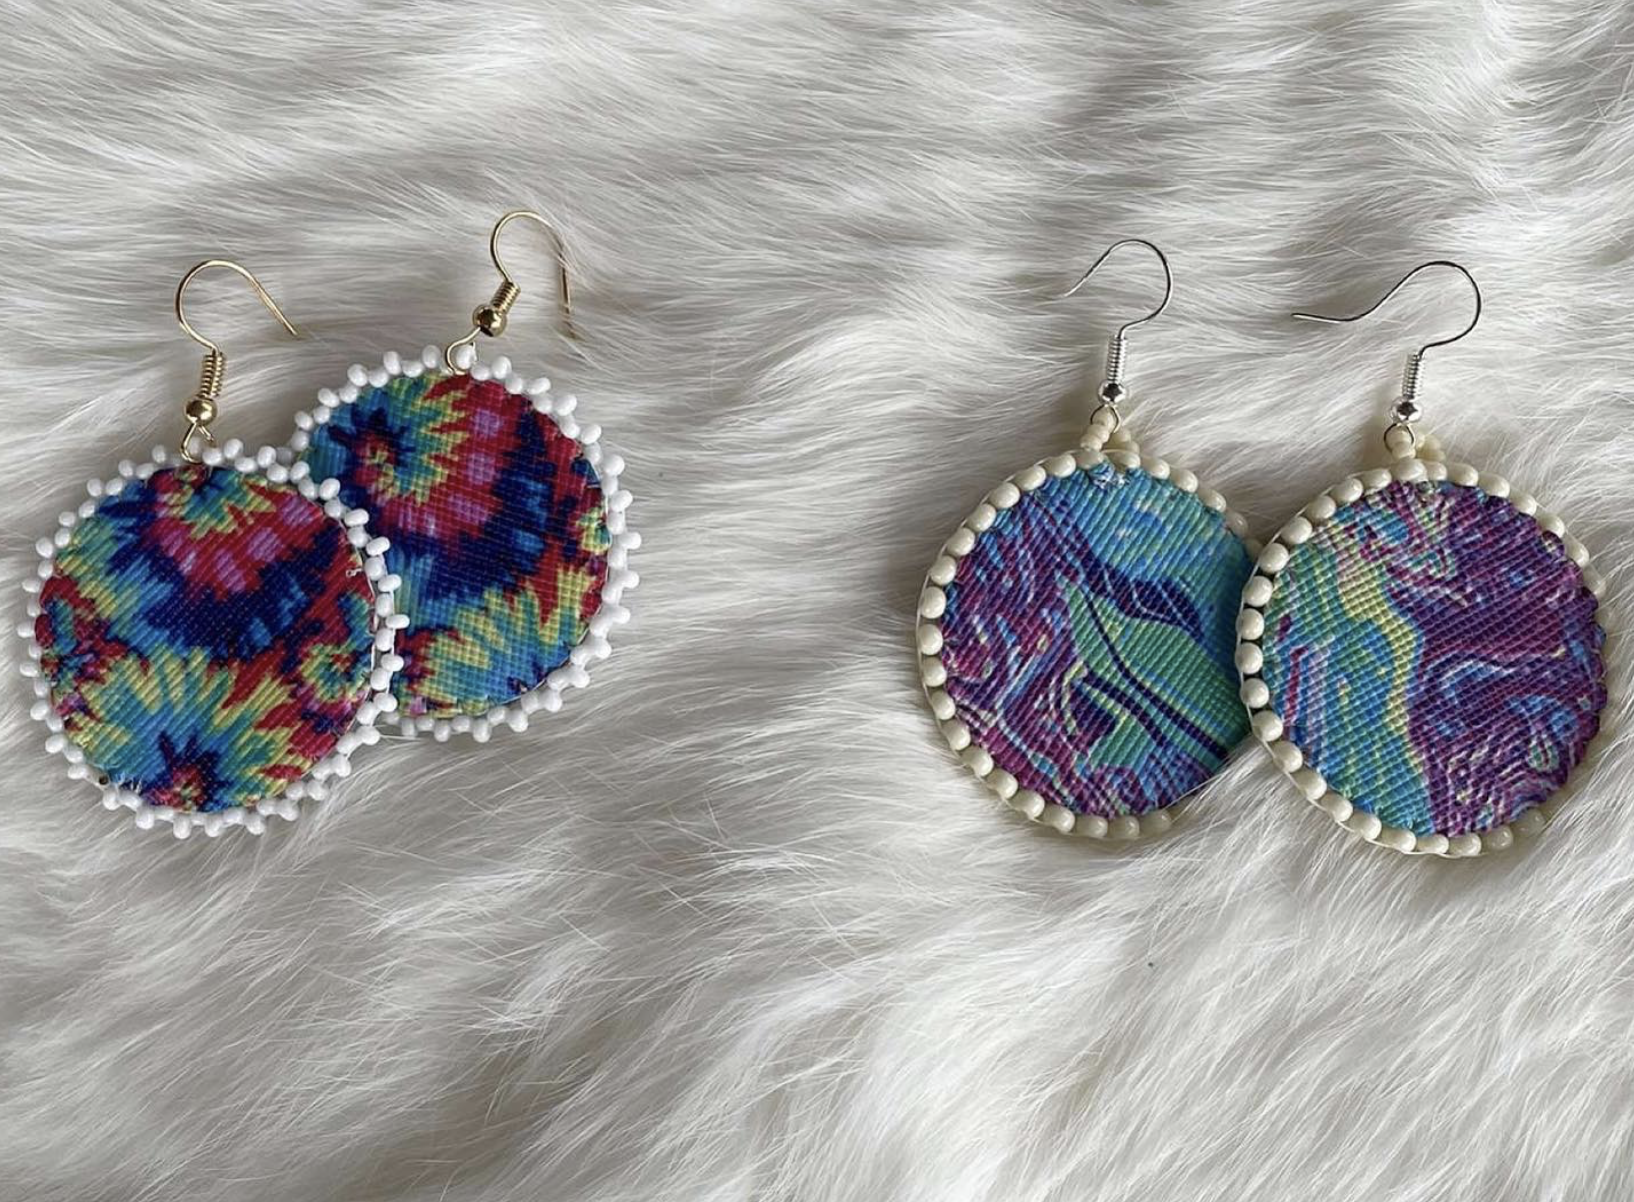 two sets of round, handbeaded earrings in purple, turquoise and green tones on a white fur background.